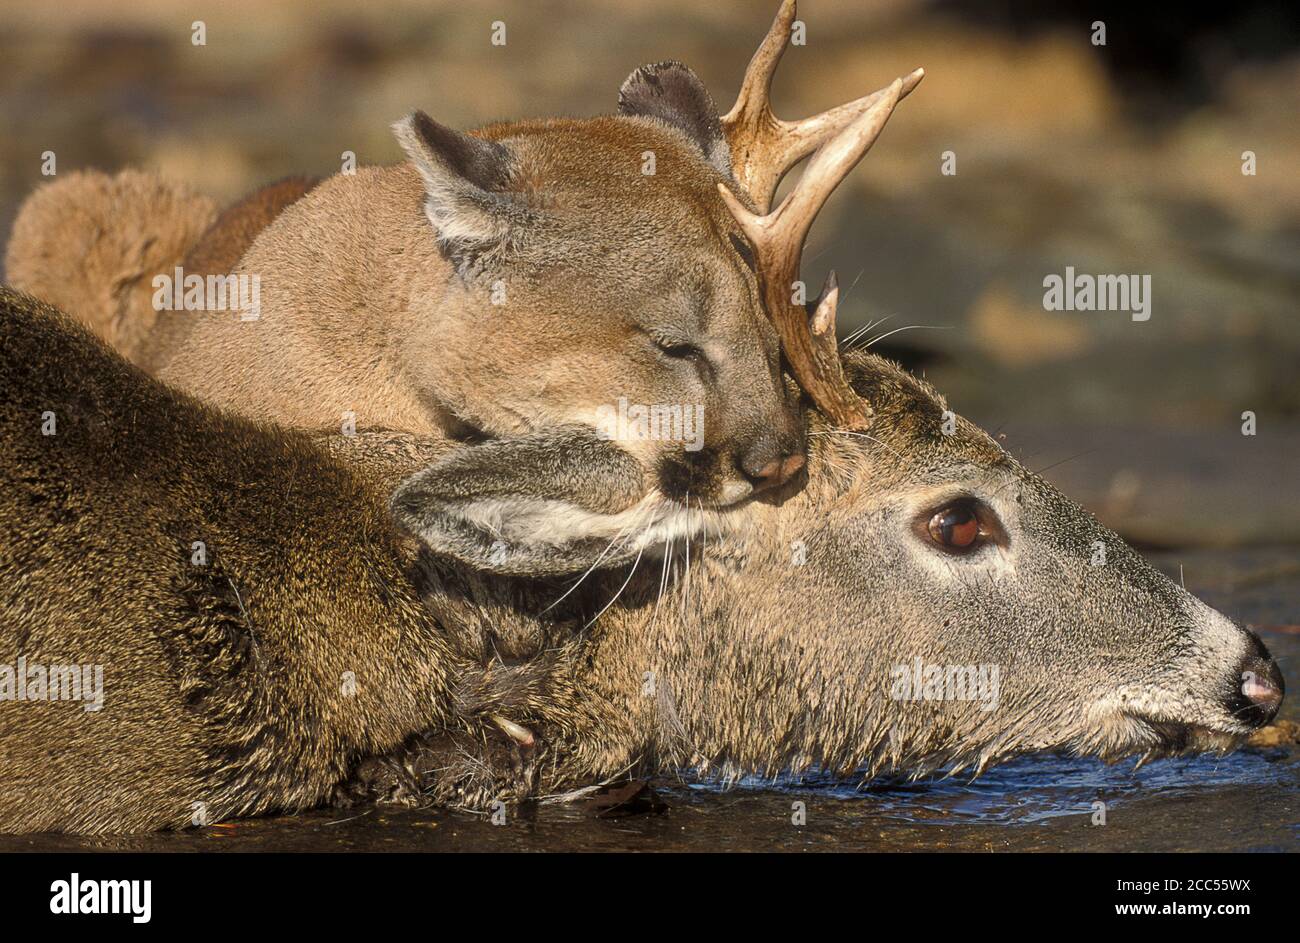 Cougar or Mountain Lion (Felis concolor), on deer kill in river, Minnesota,  USA, controlled situation Stock Photo - Alamy